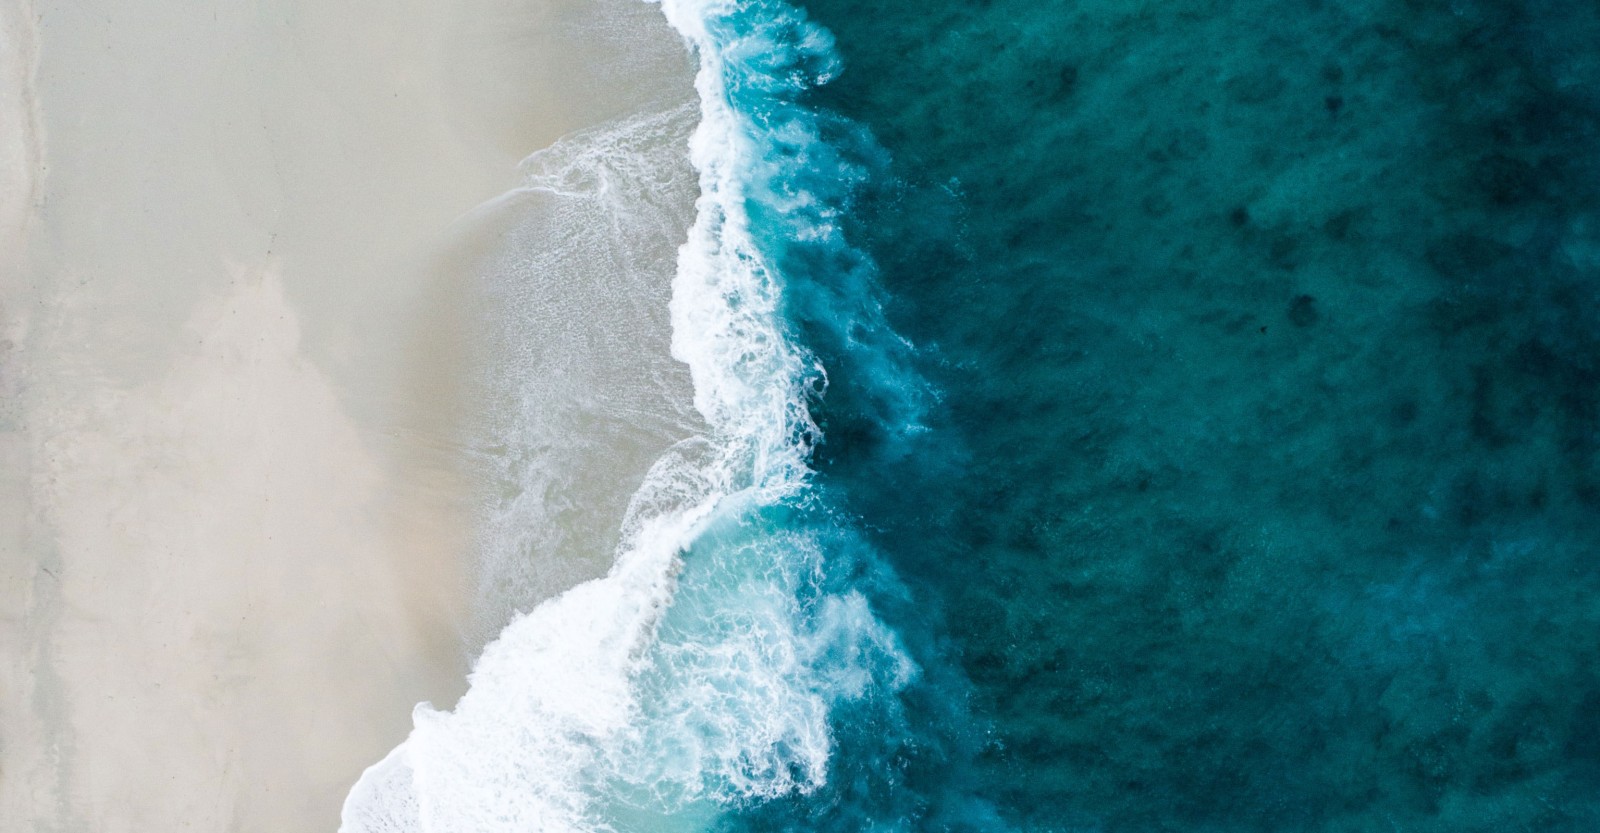 The sea from above